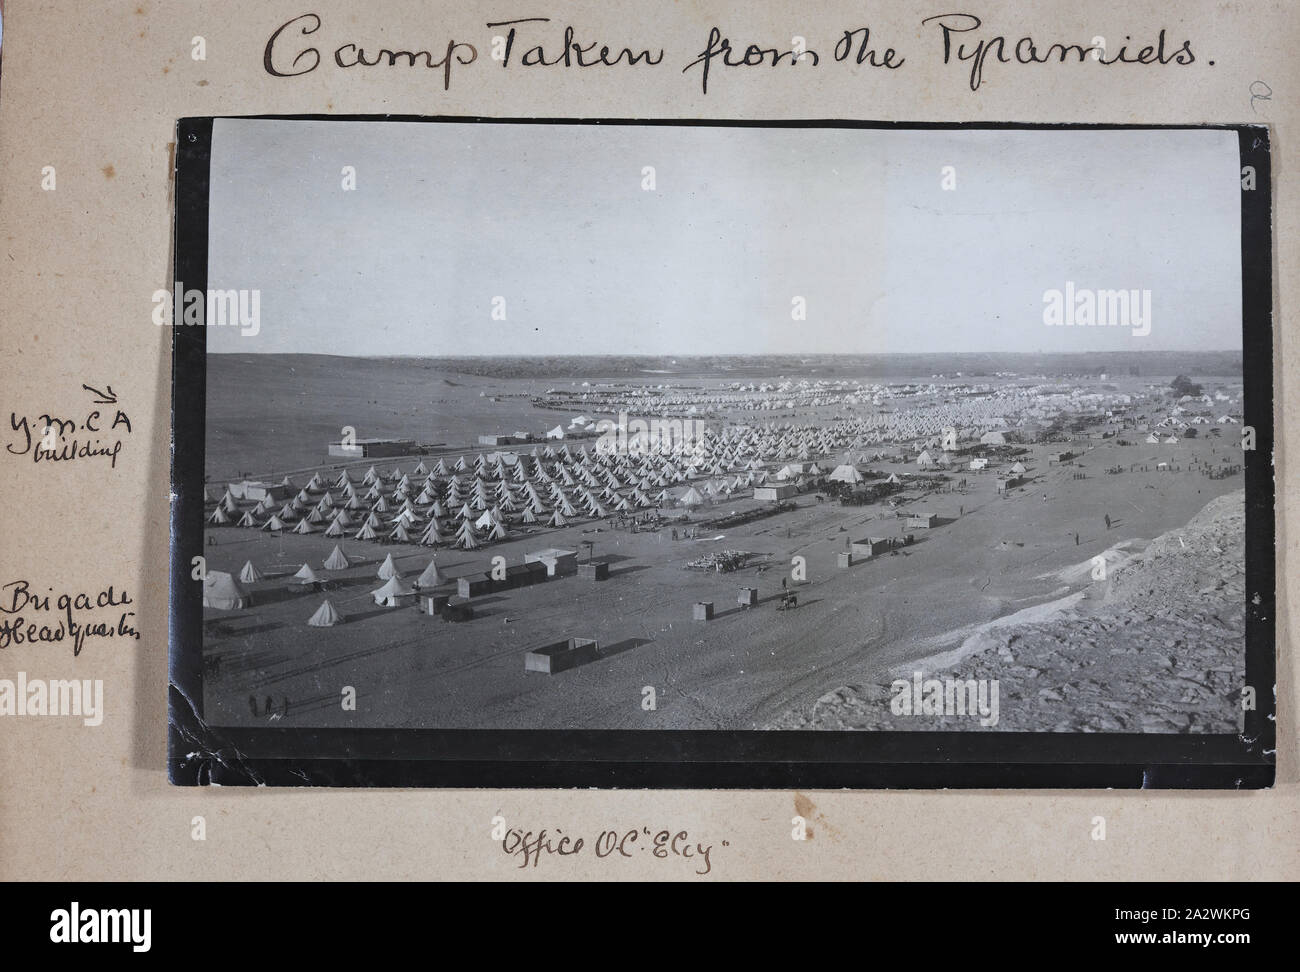 Photograph - Mena Camp from the Pyramids, Egypt, Captain Edward Albert McKenna, World War I, 1914-1915, One of 139 photographs in an album from World War I likely to have been taken by Captain Edward Albert McKenna. The photographs include the 7th Battalion training in Mena Camp, Egypt, and sight-seeing. Image of Mena Camp, Egypt, taken from the Pyramids at Giza. Mena Camp was one of three training camps in Egypt that were used by the A.I.F. and the N.Z.E.F Stock Photo